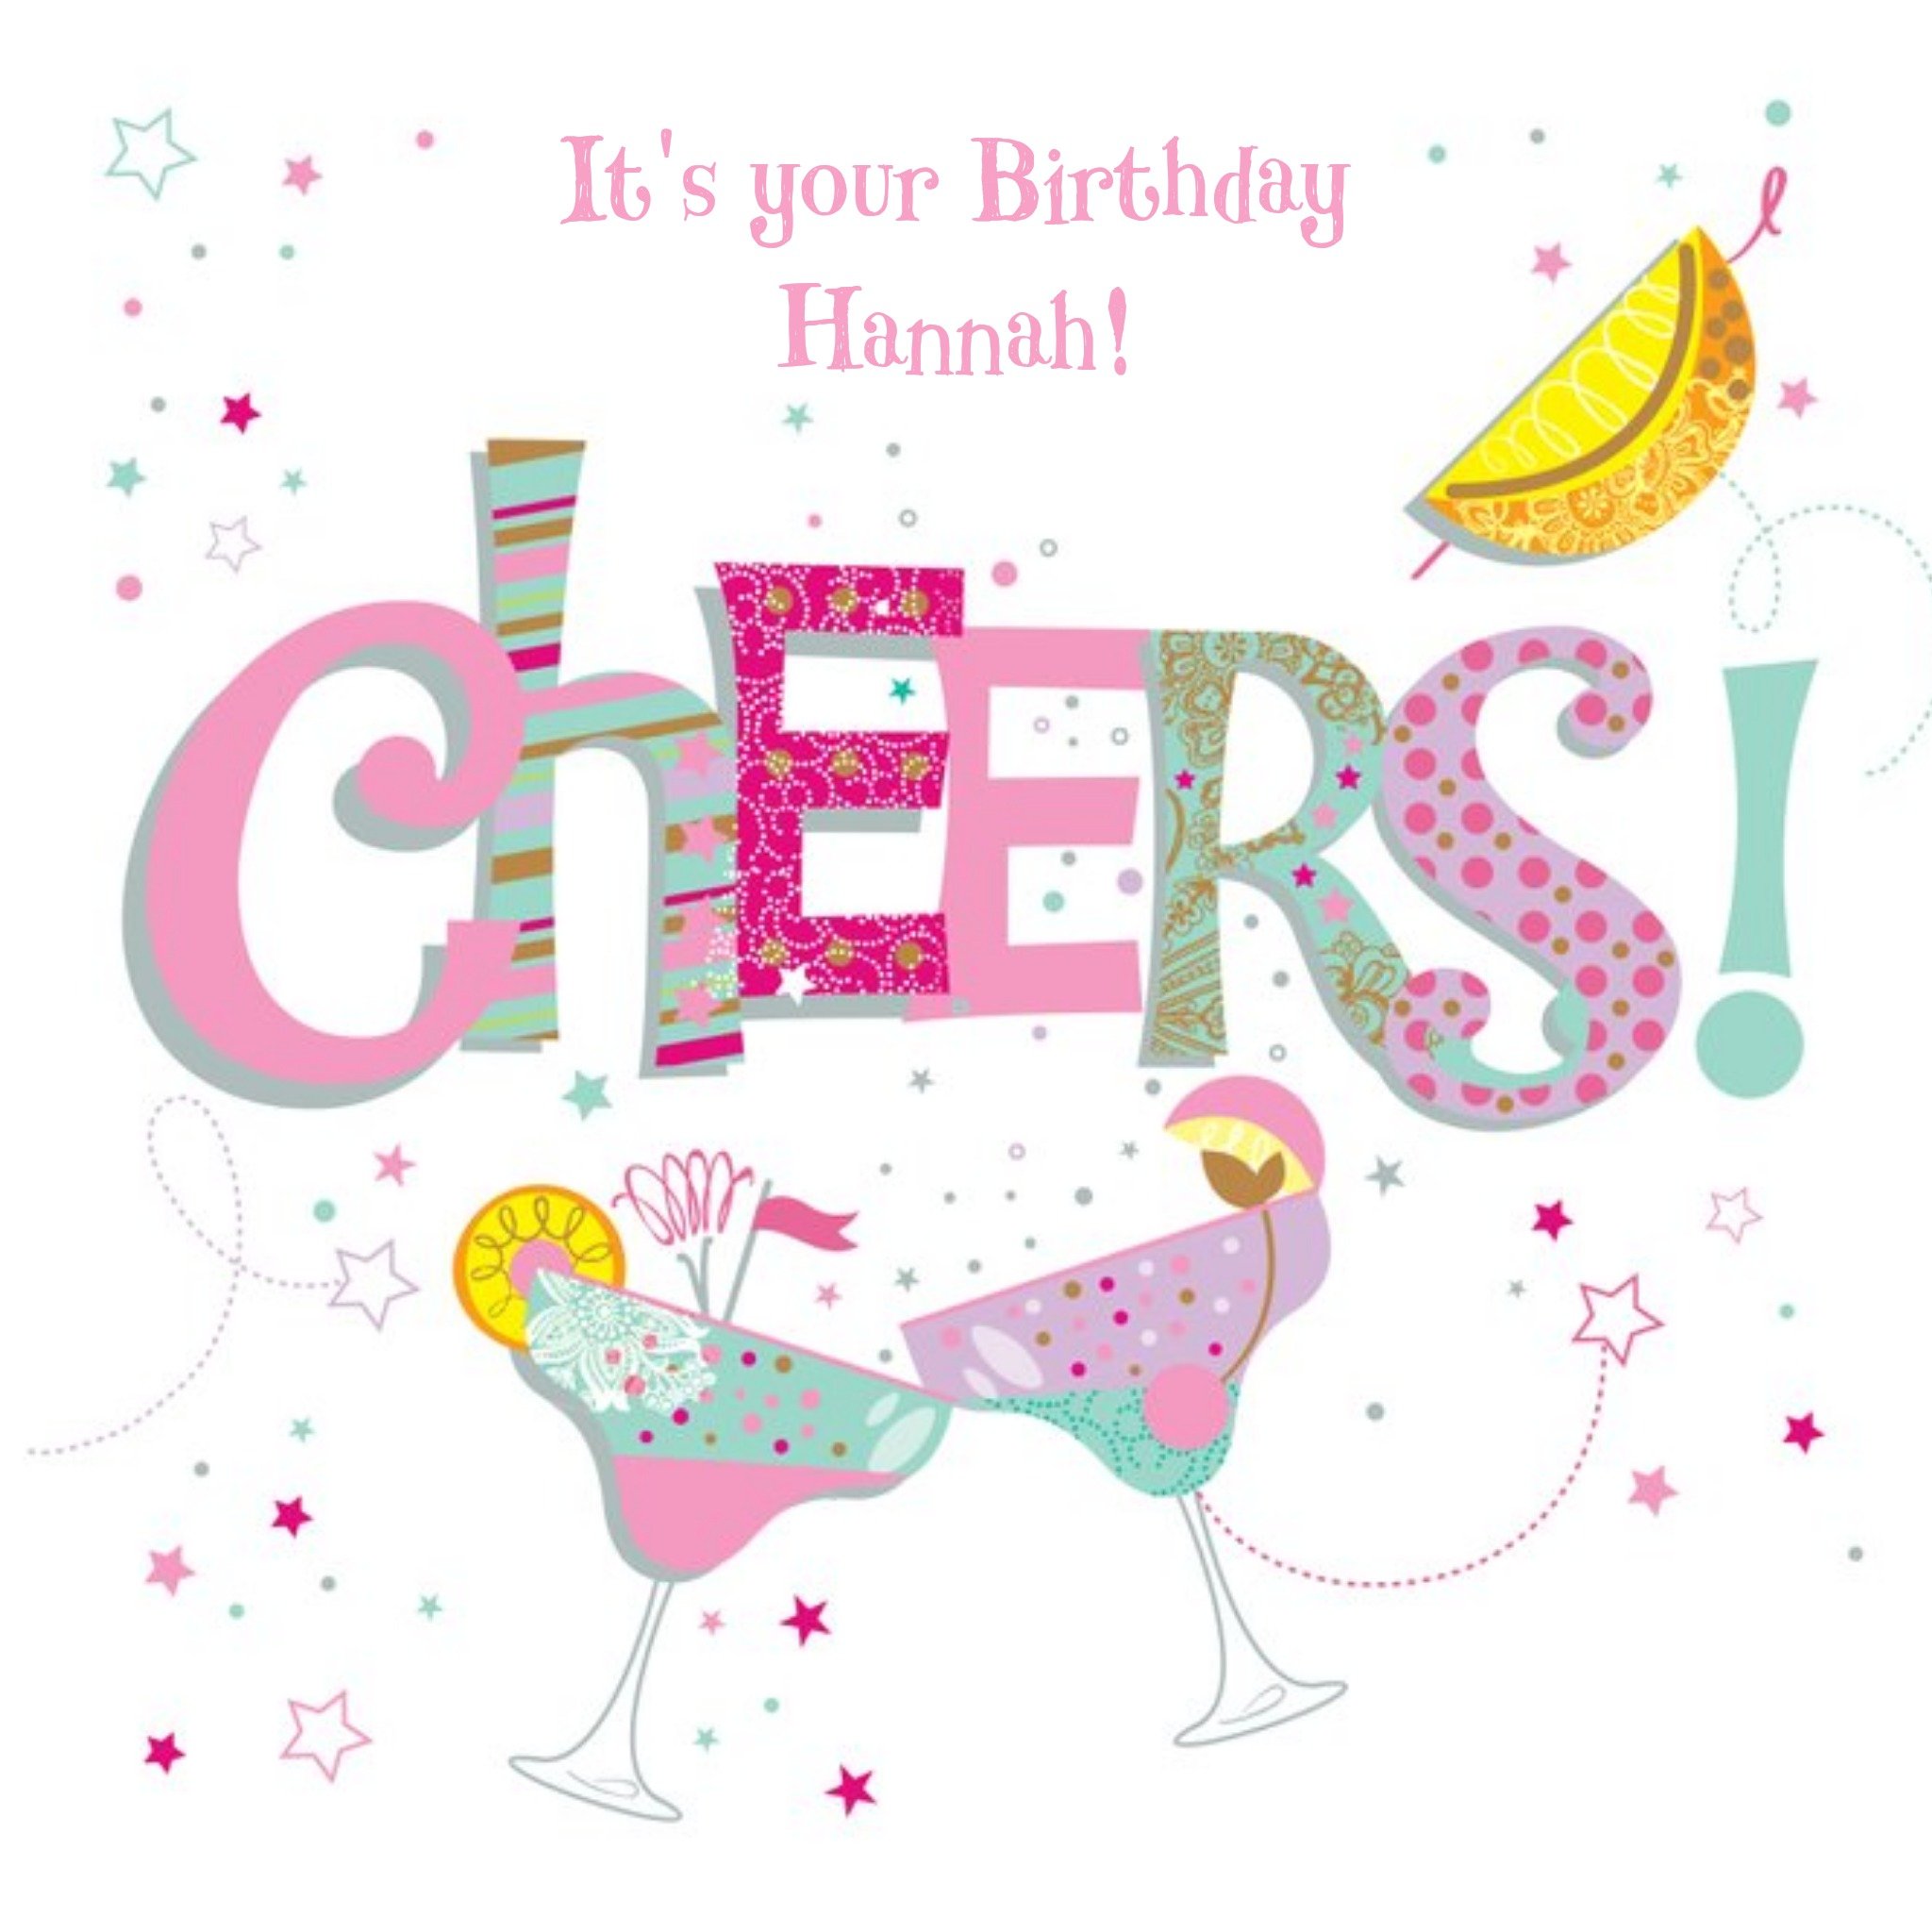 Ling Design Margarita Party Happy Birthday Card, Large